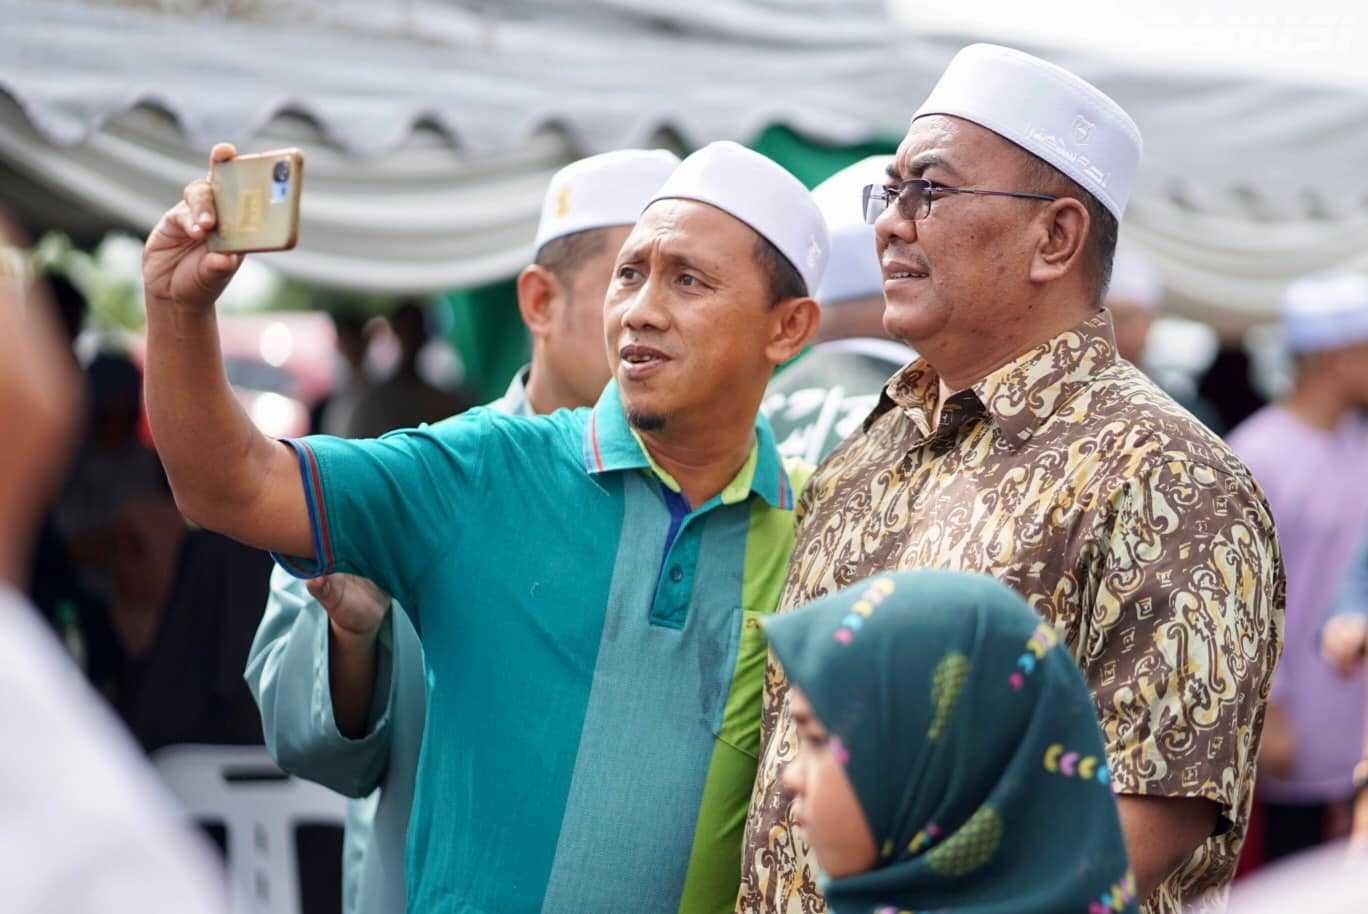 Kedah Menteri Besar Muhammad Sanusi Md Nor poses for a selfie with a guest at an open house in April. Photo: Facebook 